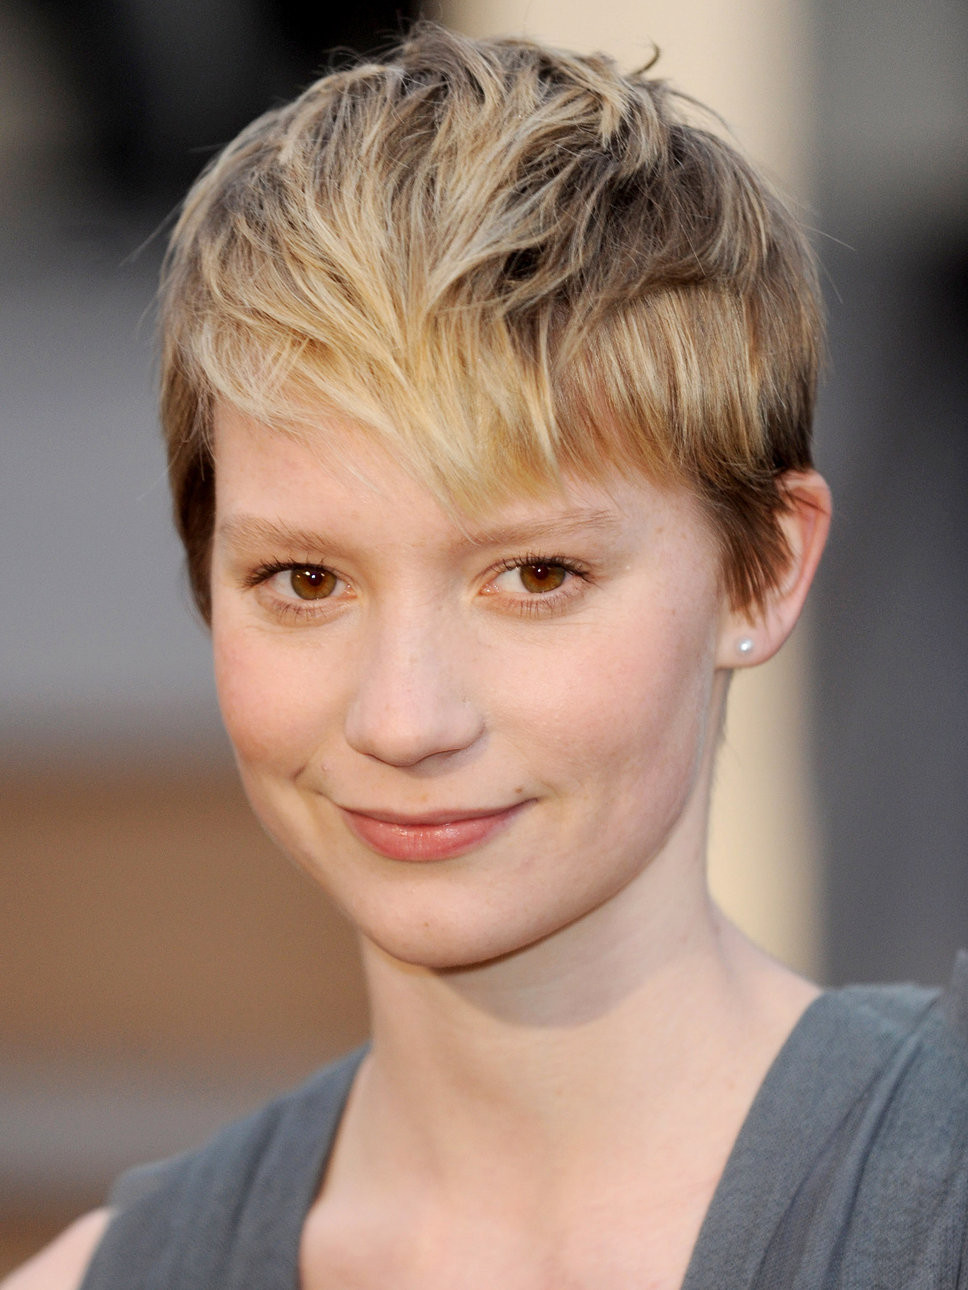 Cute Pixie Hairstyles
 40 Cute Short Hairstyles Which Are Outstanding SloDive